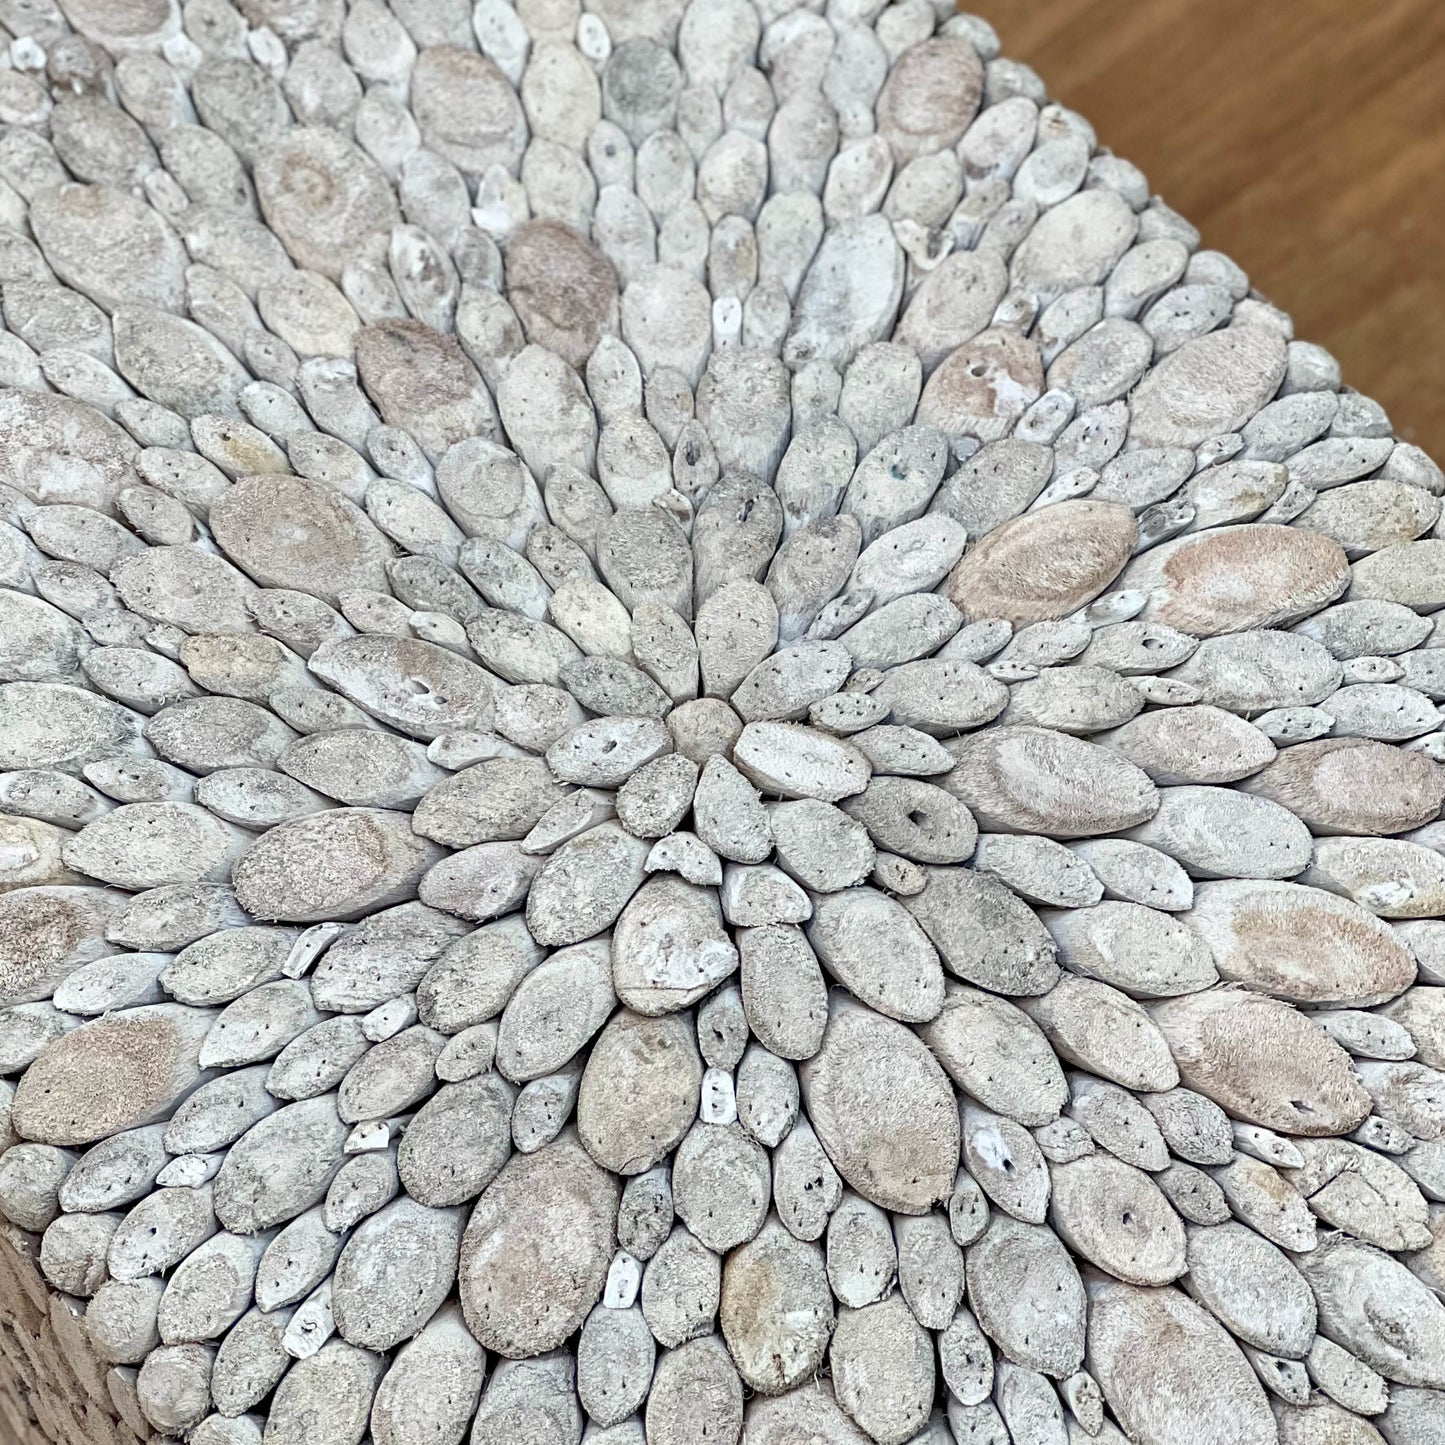 Coral Hourglass Coffee Table